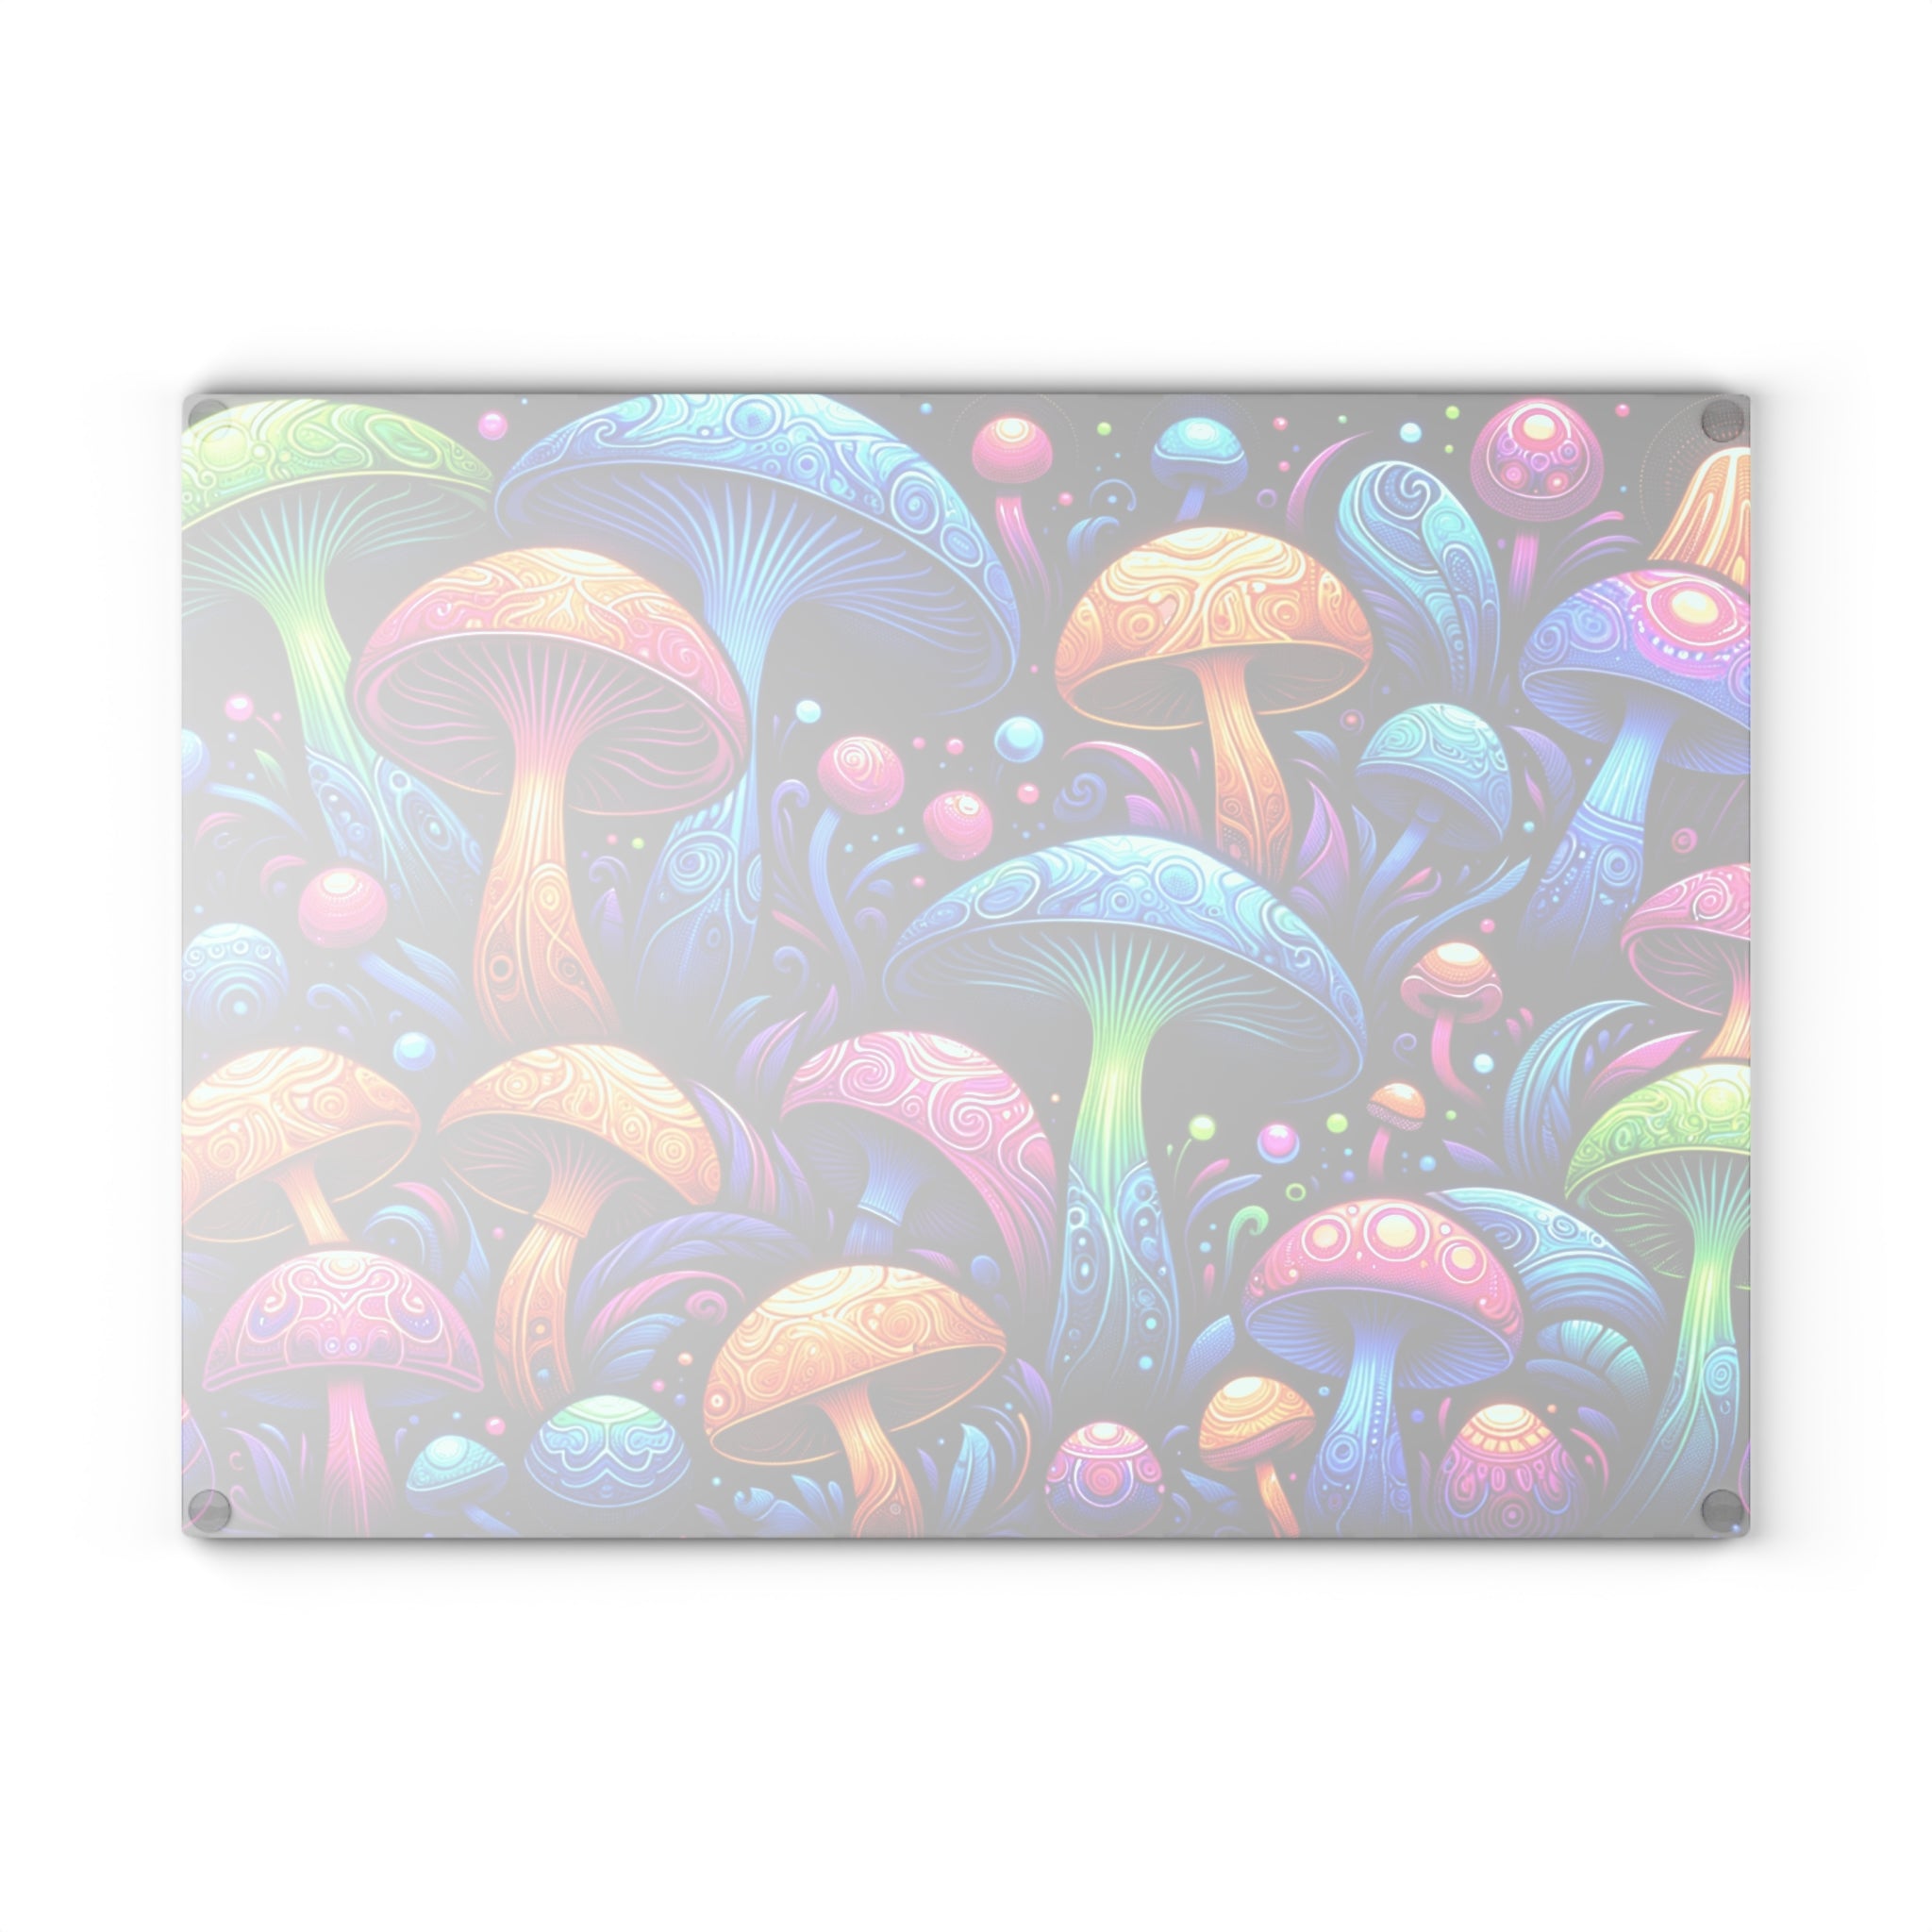 Colorful Mushroom Whimsical Glass Cutting Board Kitchen Boho Eclectic Home Decor Gift for Her